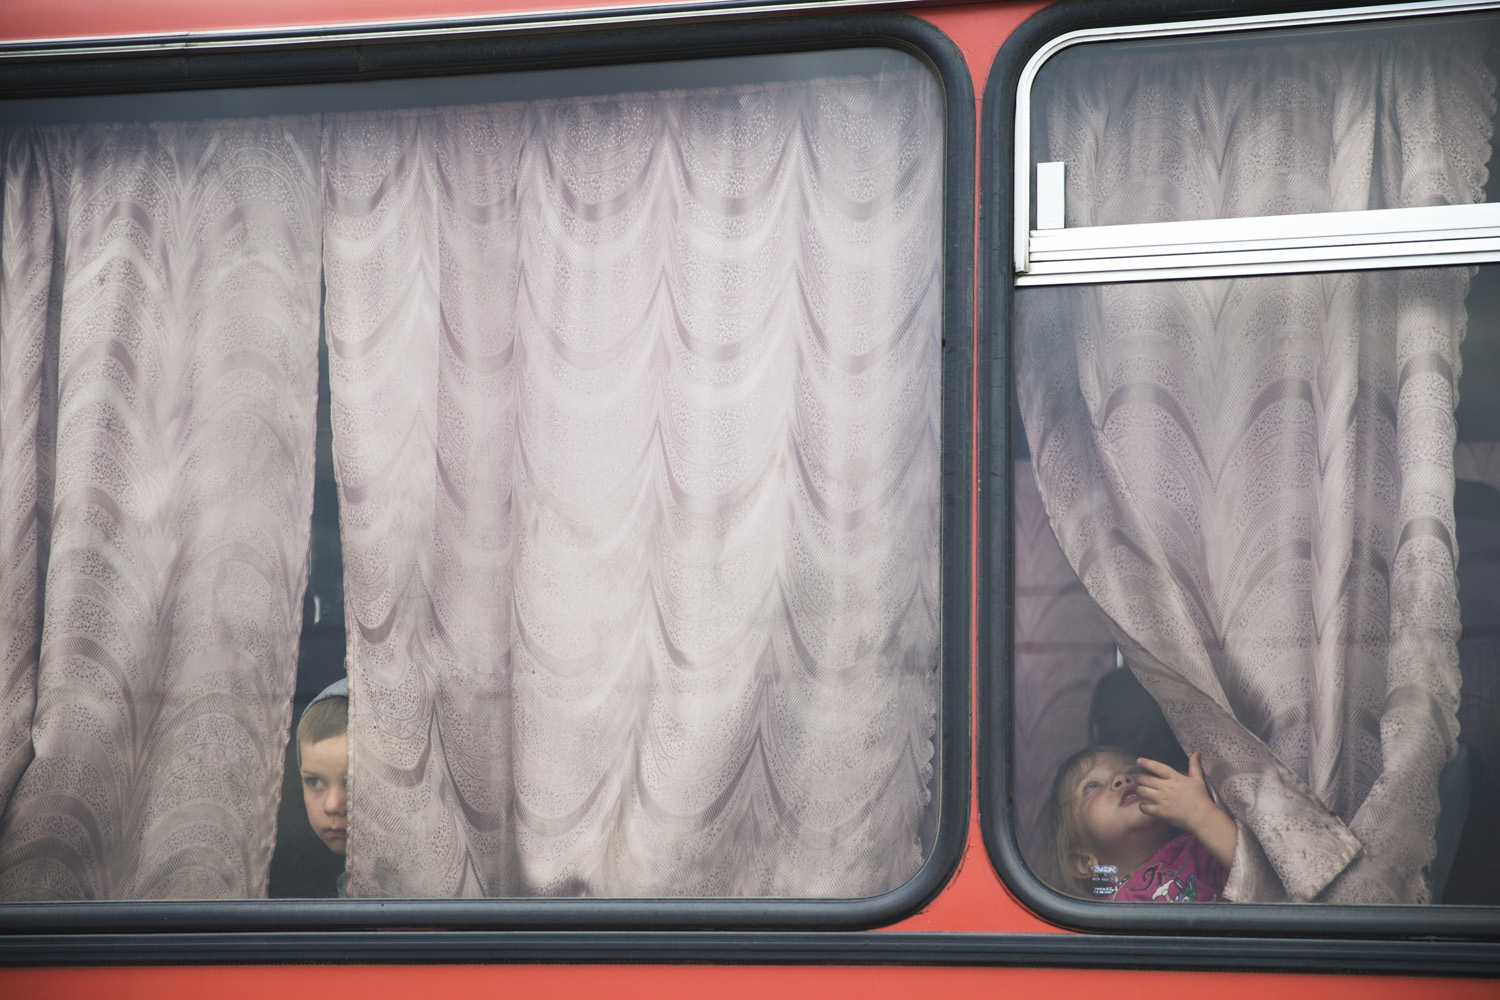 Aug. 18, 2014. Children look out from a bus before leaving for the train station, ahead of a train journey to the Russian Siberian city of Irkutsk where they are being relocated, at a refugee camp set up by the Russian Emergencies Ministry about 10 kilometers (6 miles) from the Russia-Ukrainian border, near Donetsk, Rostov-on-Don region, Russia.